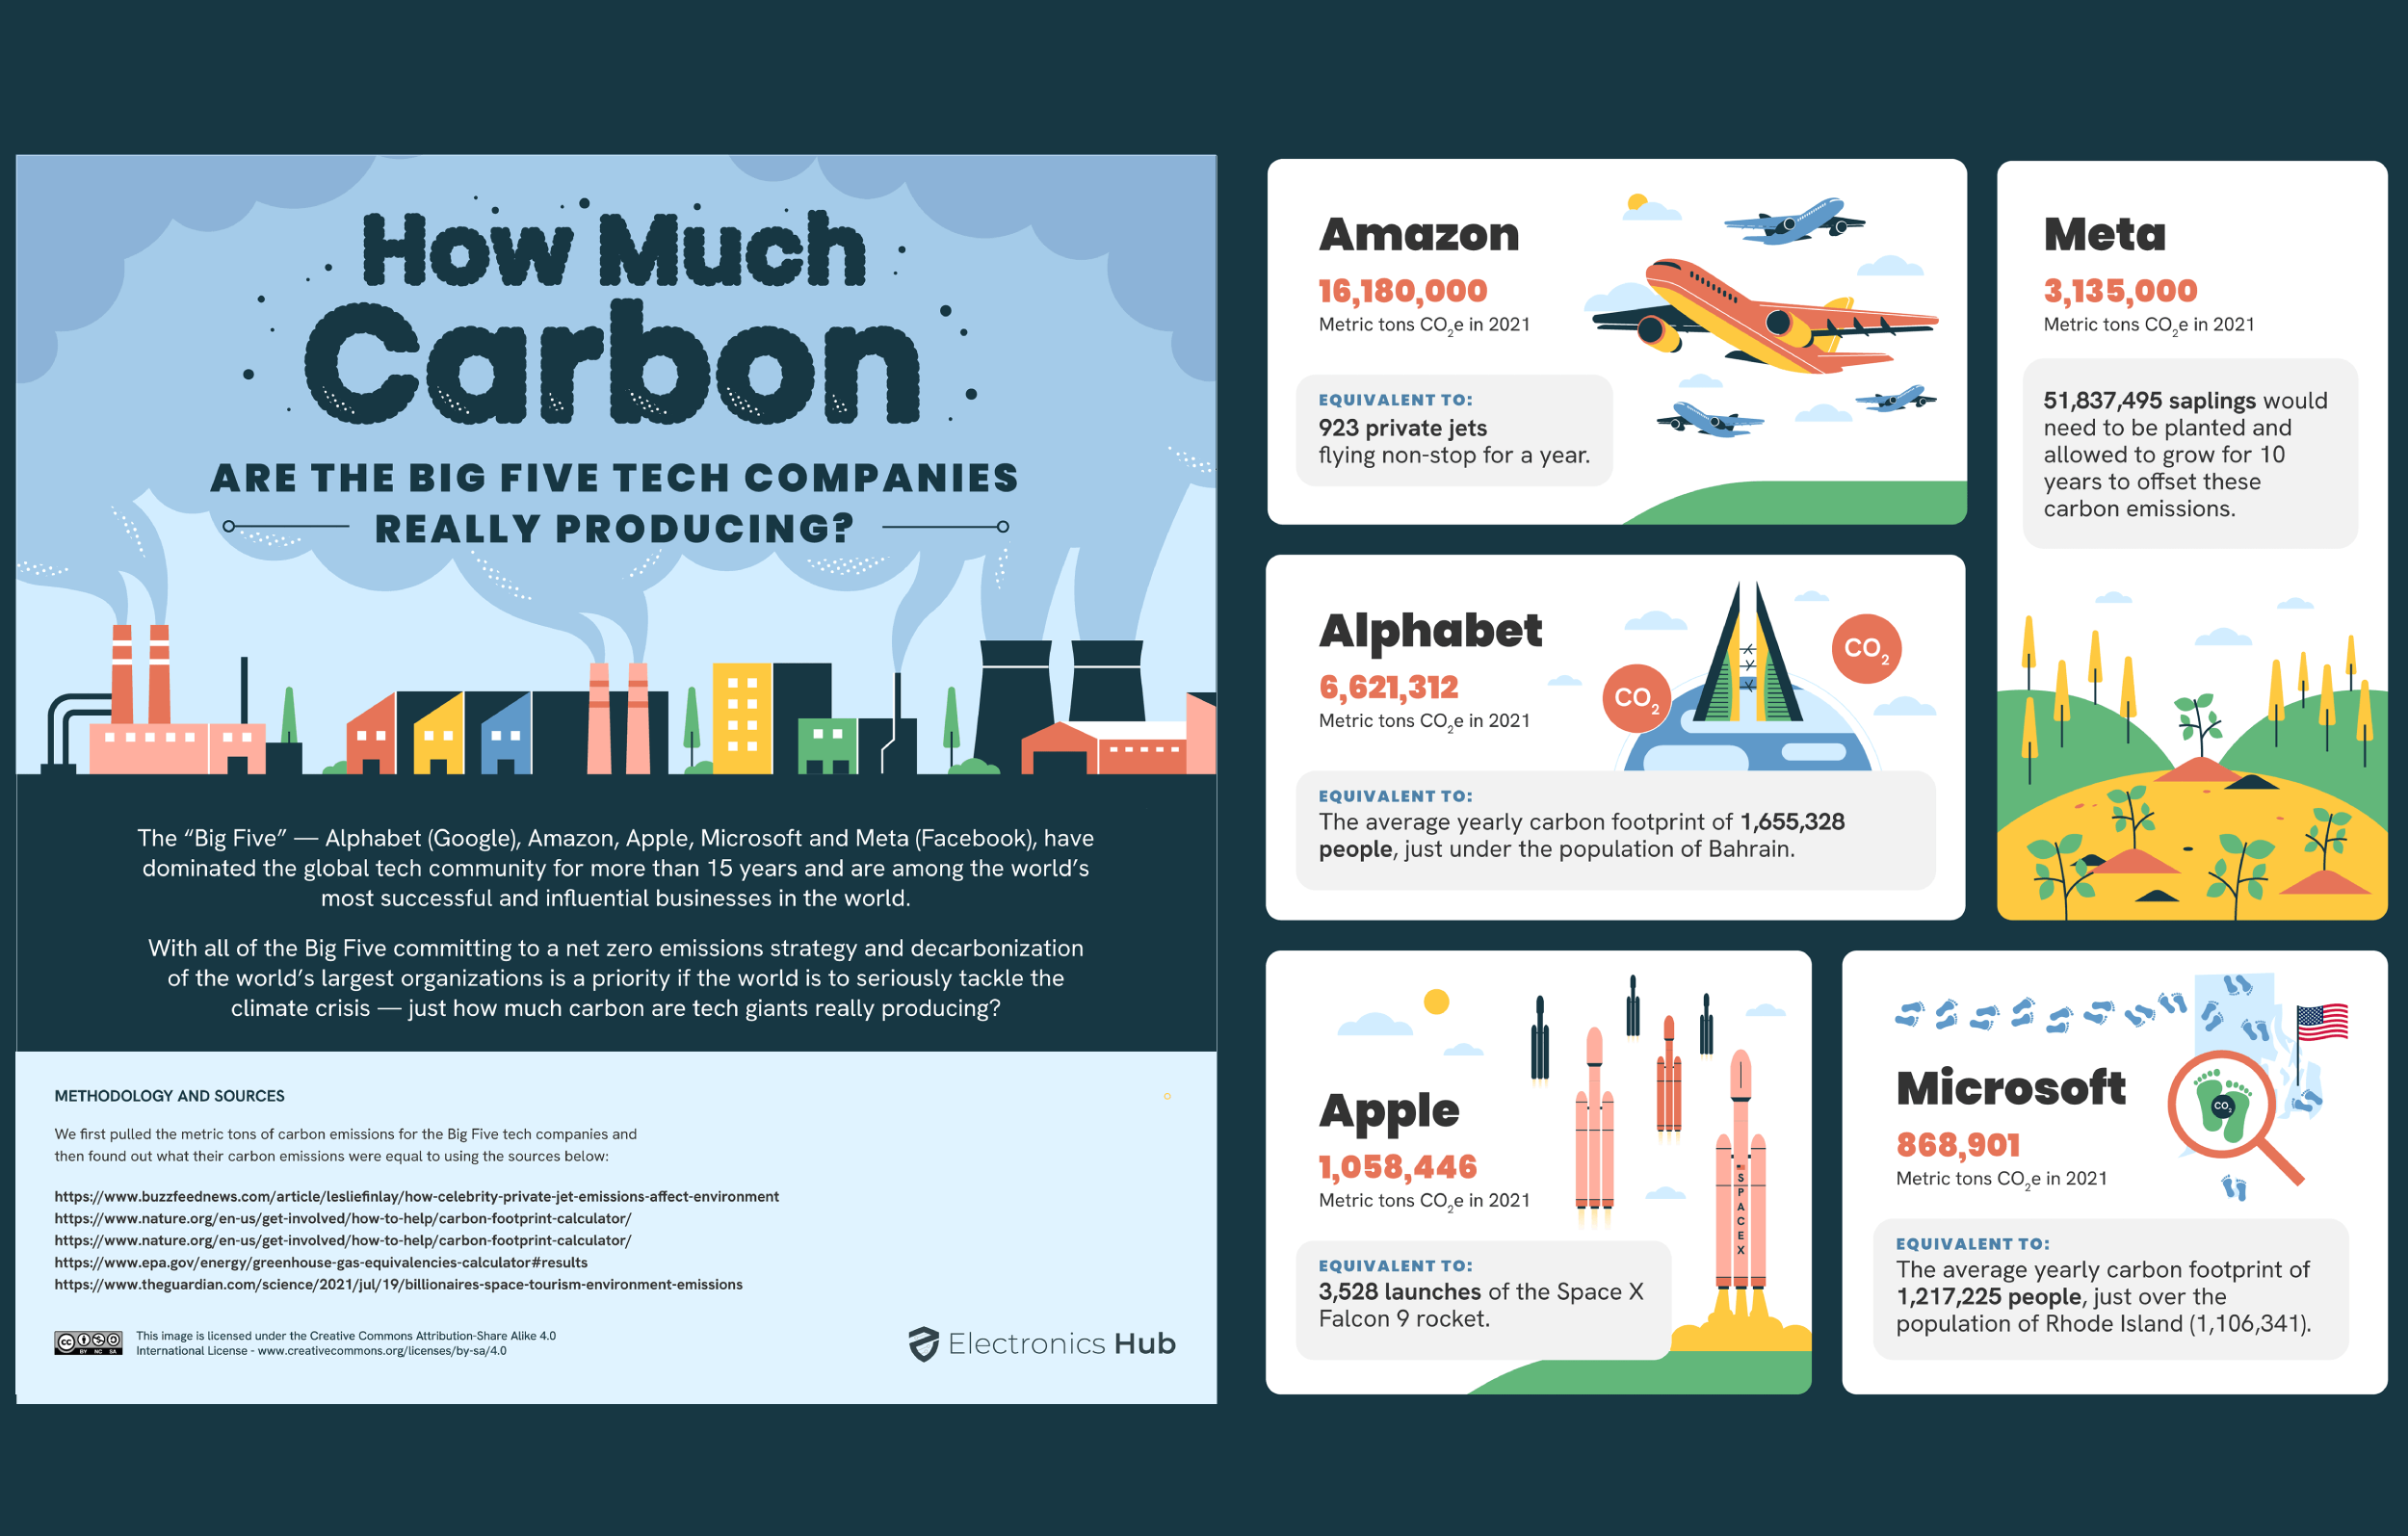 The Carbon Emissions of Big Tech